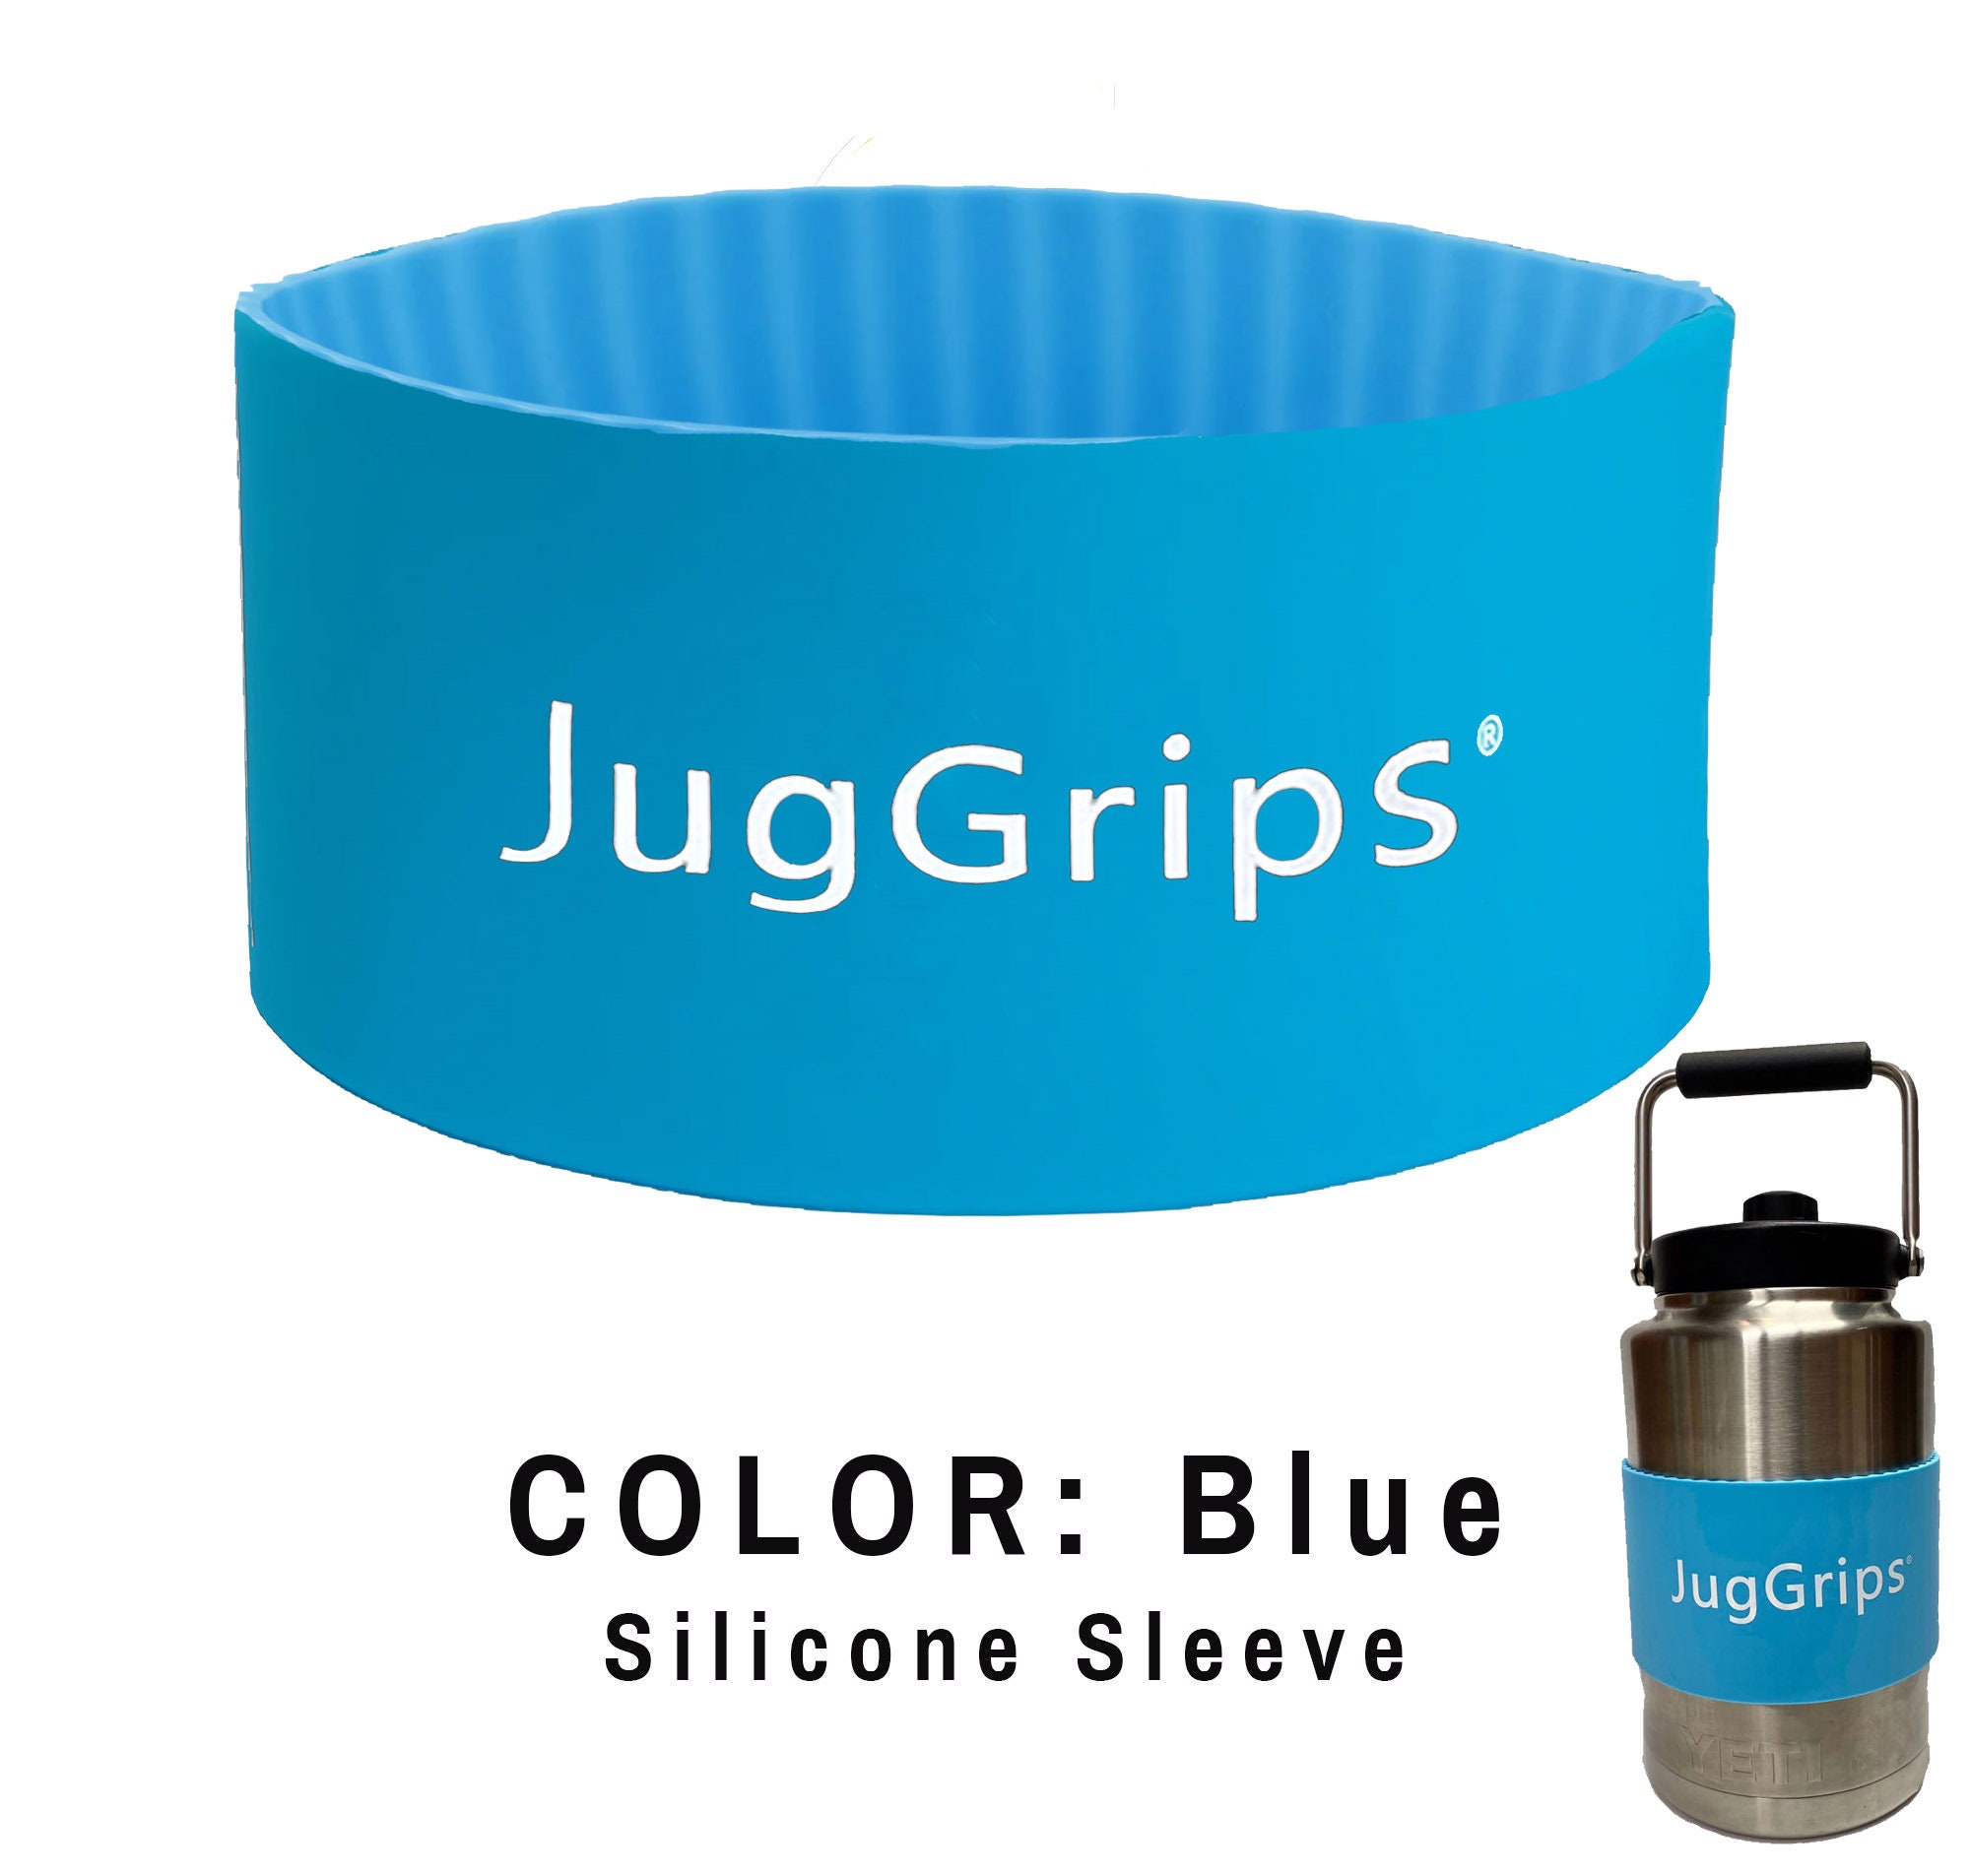  JugGrips YETI Grip Sleeve for Hard to Open Lids